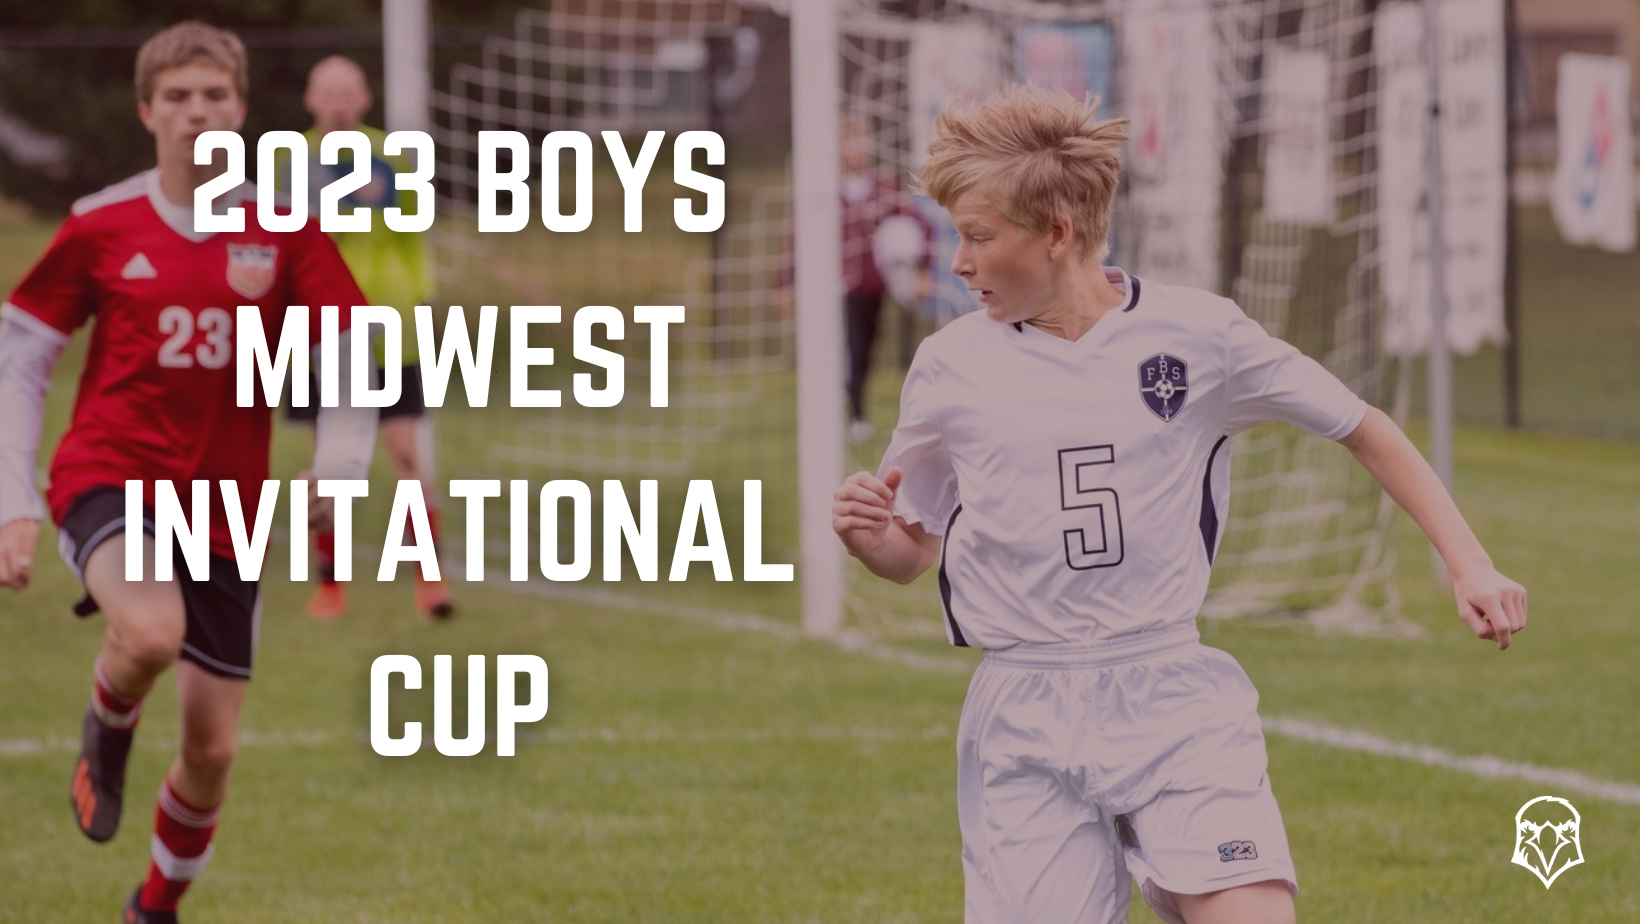 2023 Boys Midwest Invitational Cup